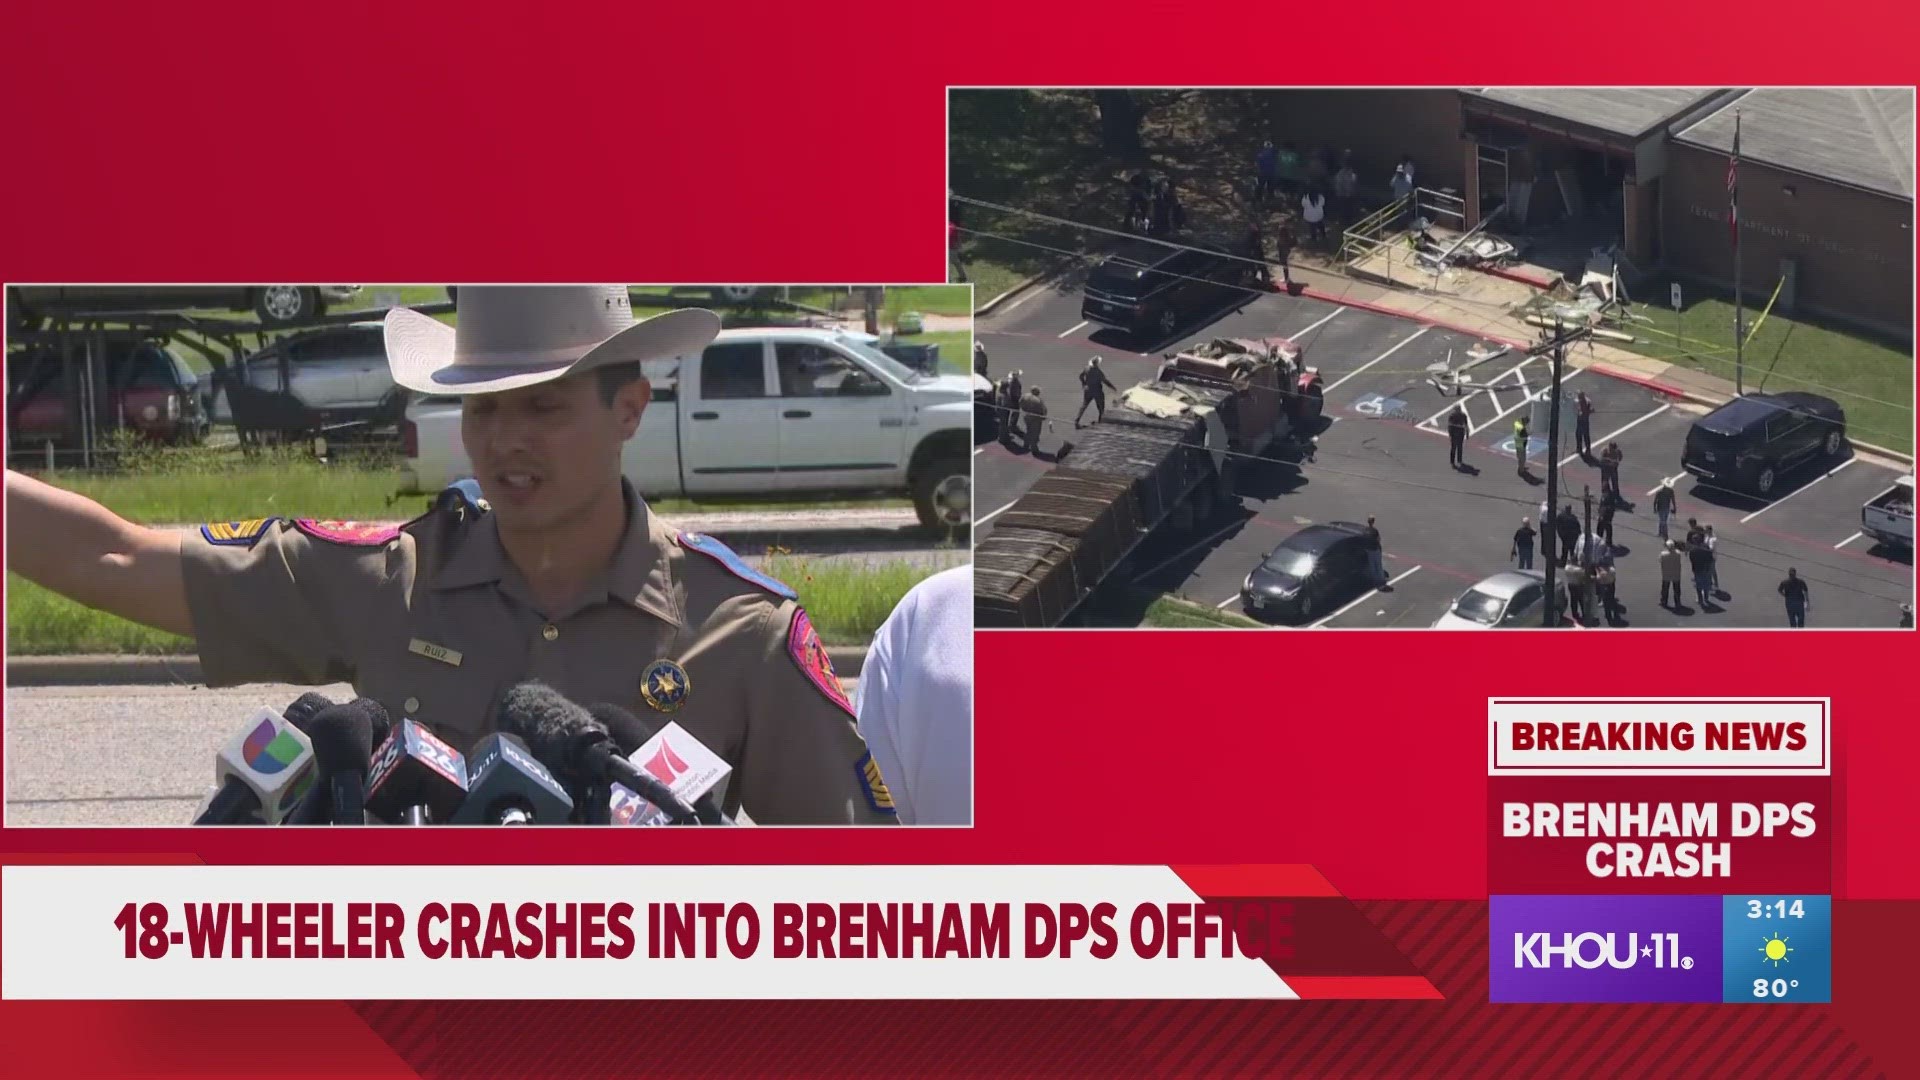 The Texas DPS gave an update Friday afternoon after a big rig crashed into a Brenham DPS office.